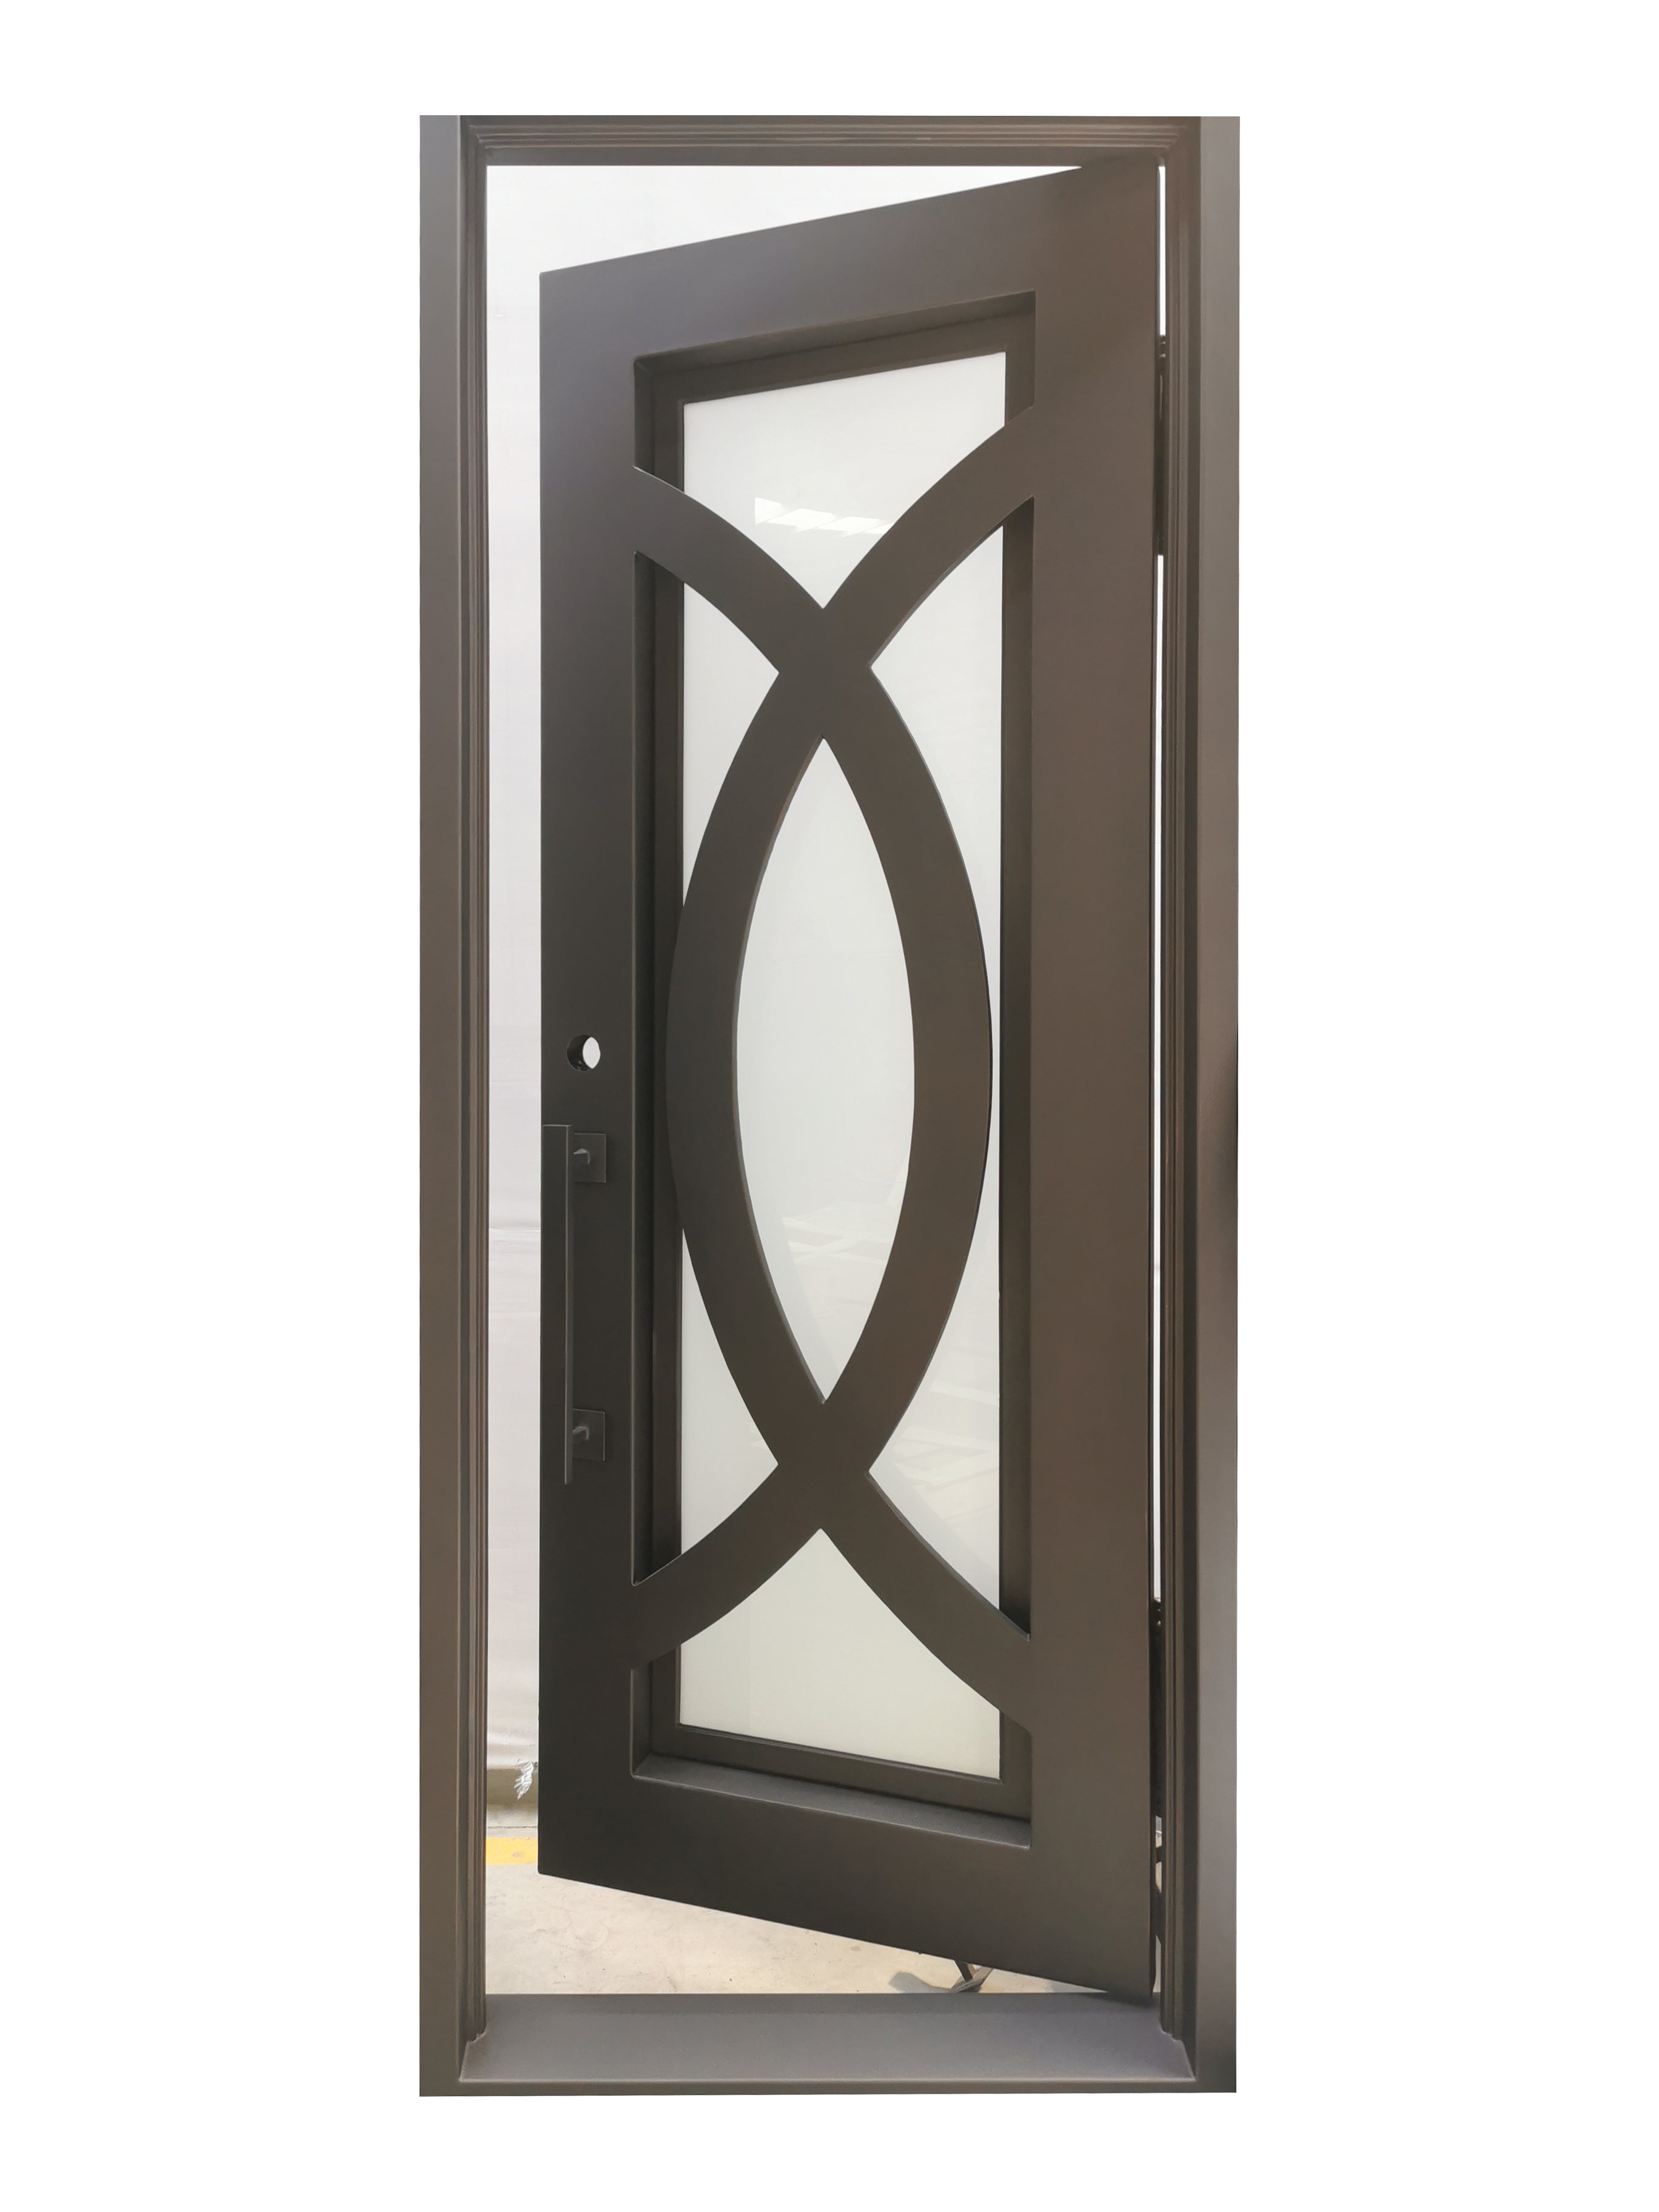 Bellevue Model Pre Hung Single Front Entry Wrought Iron Door With Frosted Glass Dark Bronze Finish